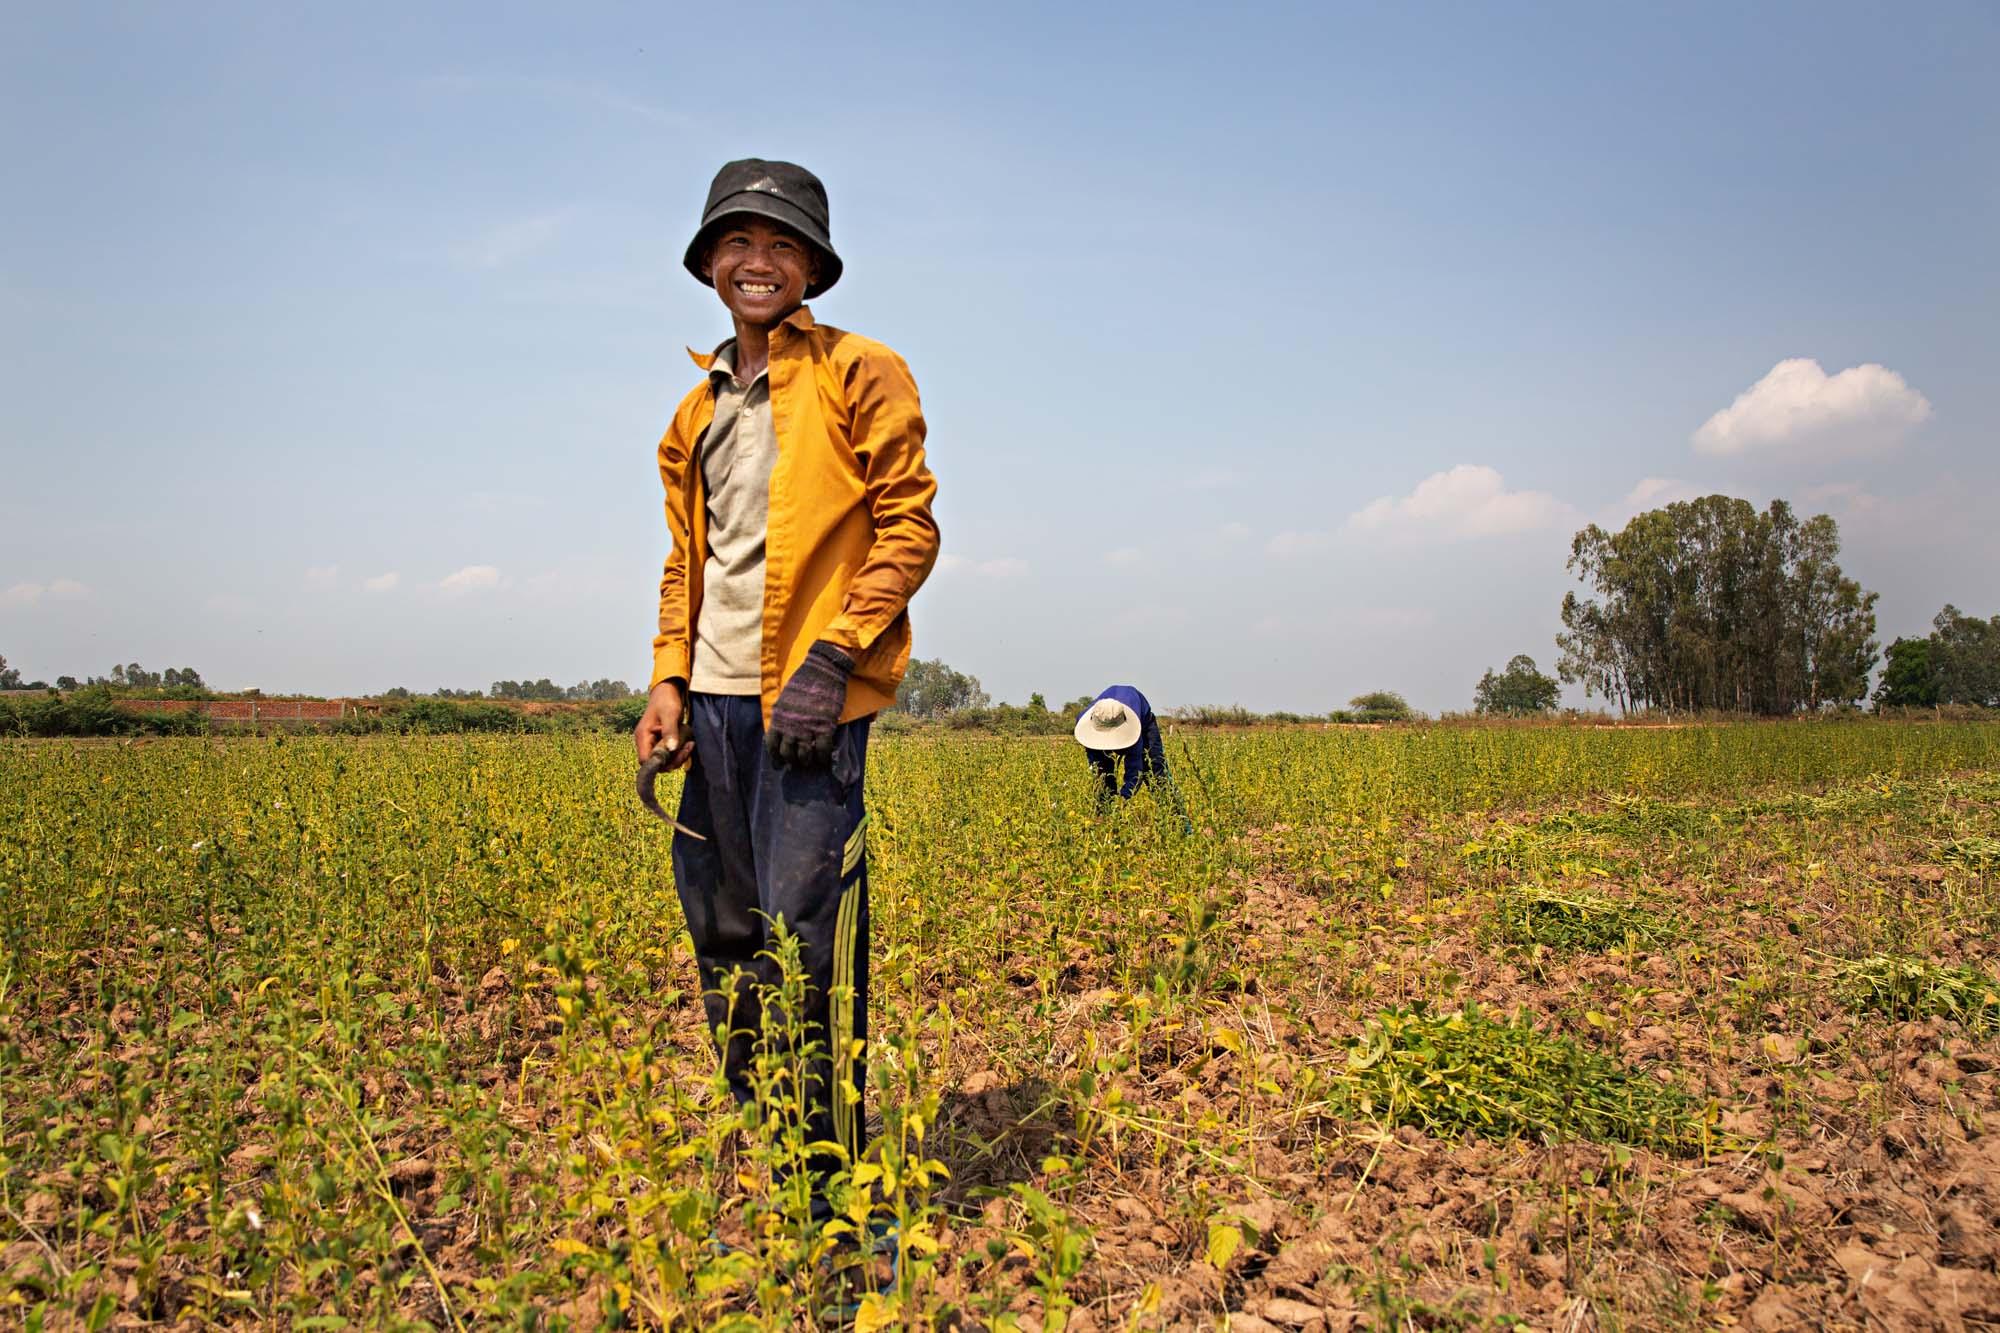 A young boy laughs while working in a field in rural Cambodia, April 2019.